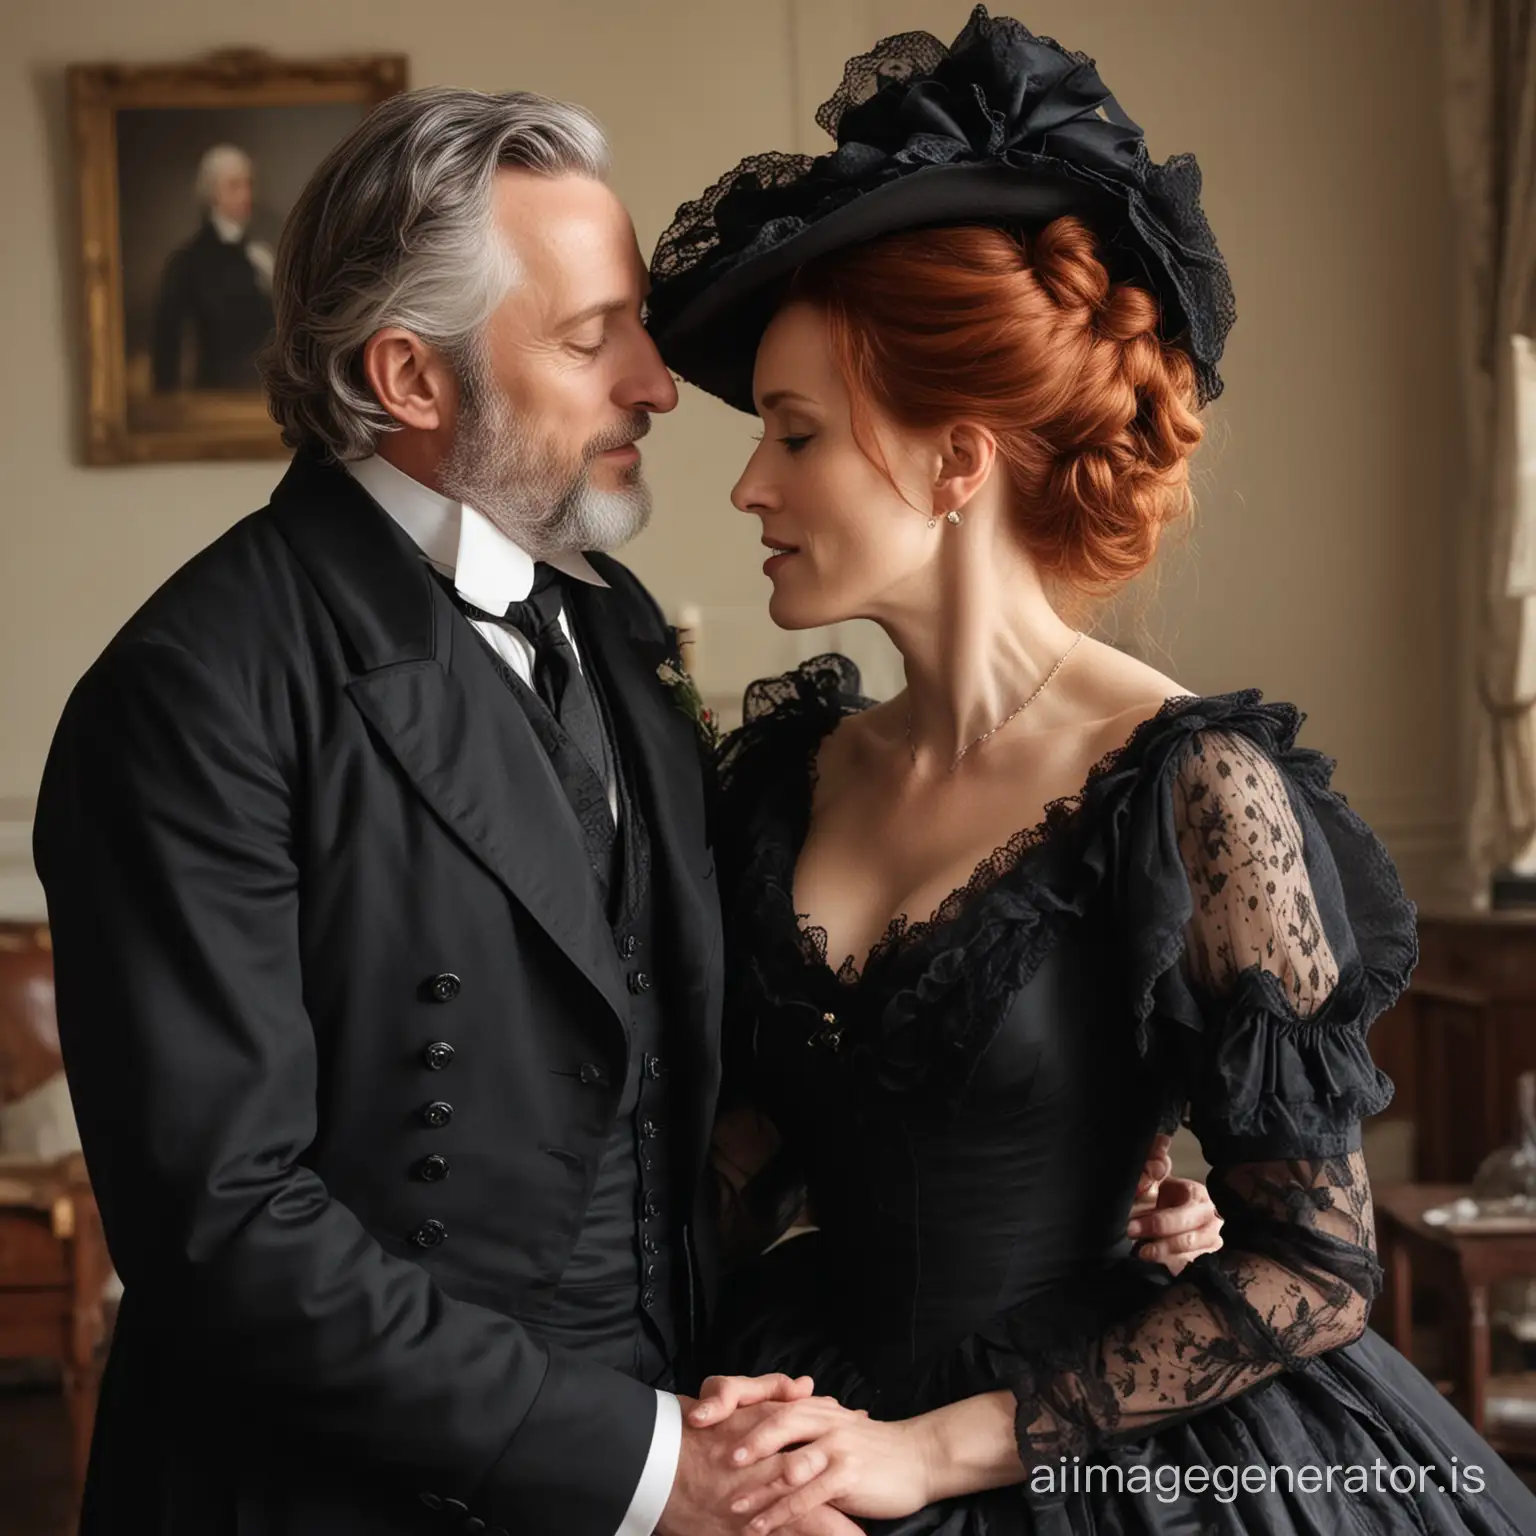 Romantic-RedHaired-Victorian-Newlyweds-Share-a-Tender-Kiss